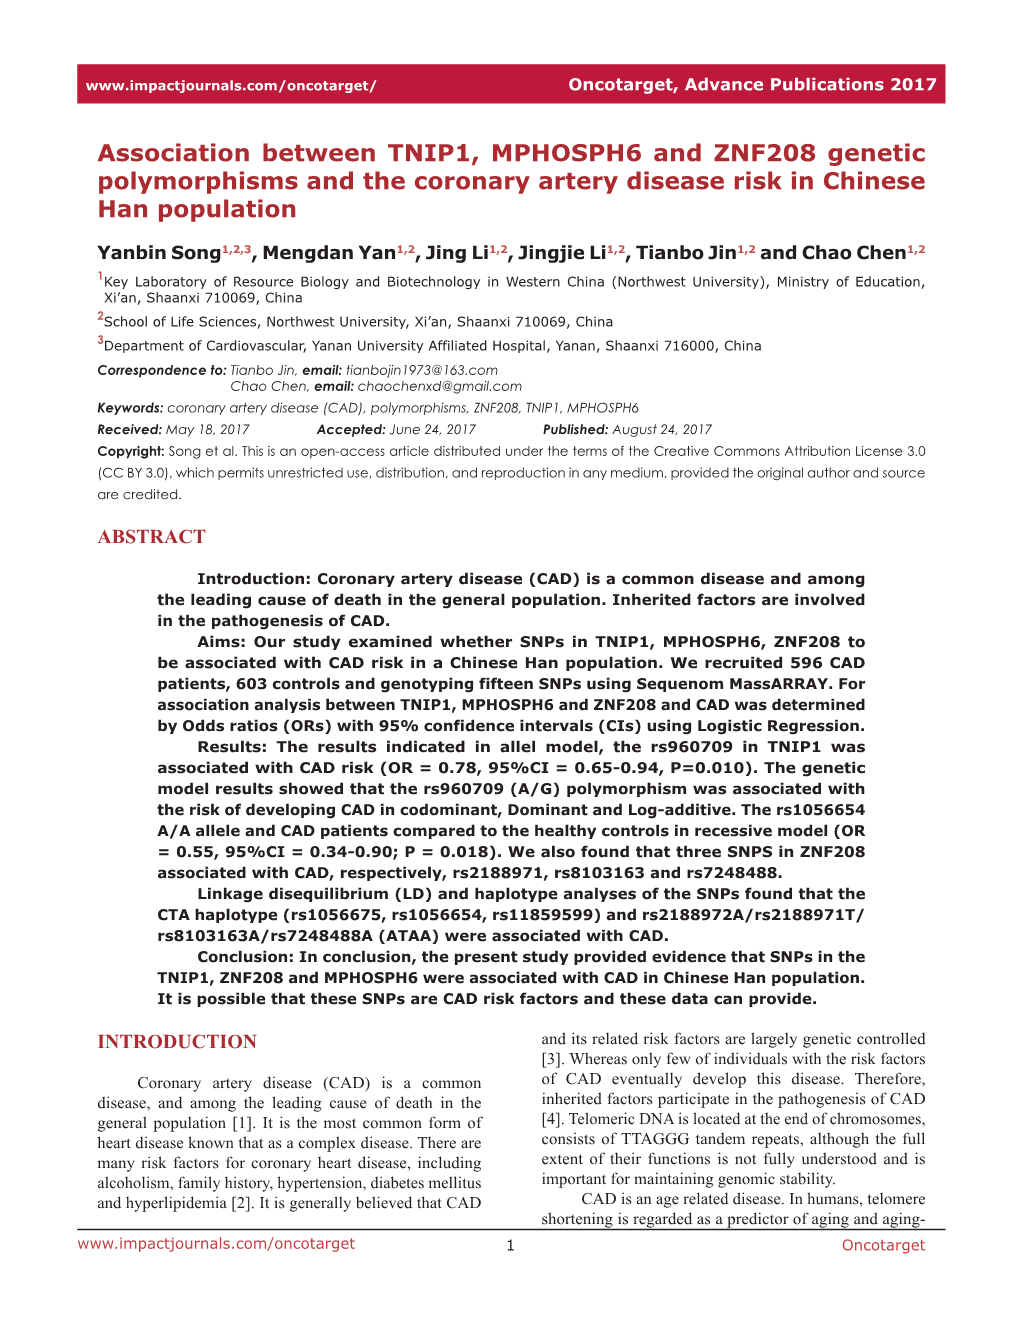 Association Between TNIP1, MPHOSPH6 and ZNF208 Genetic Polymorphisms and the Coronary Artery Disease Risk in Chinese Han Population